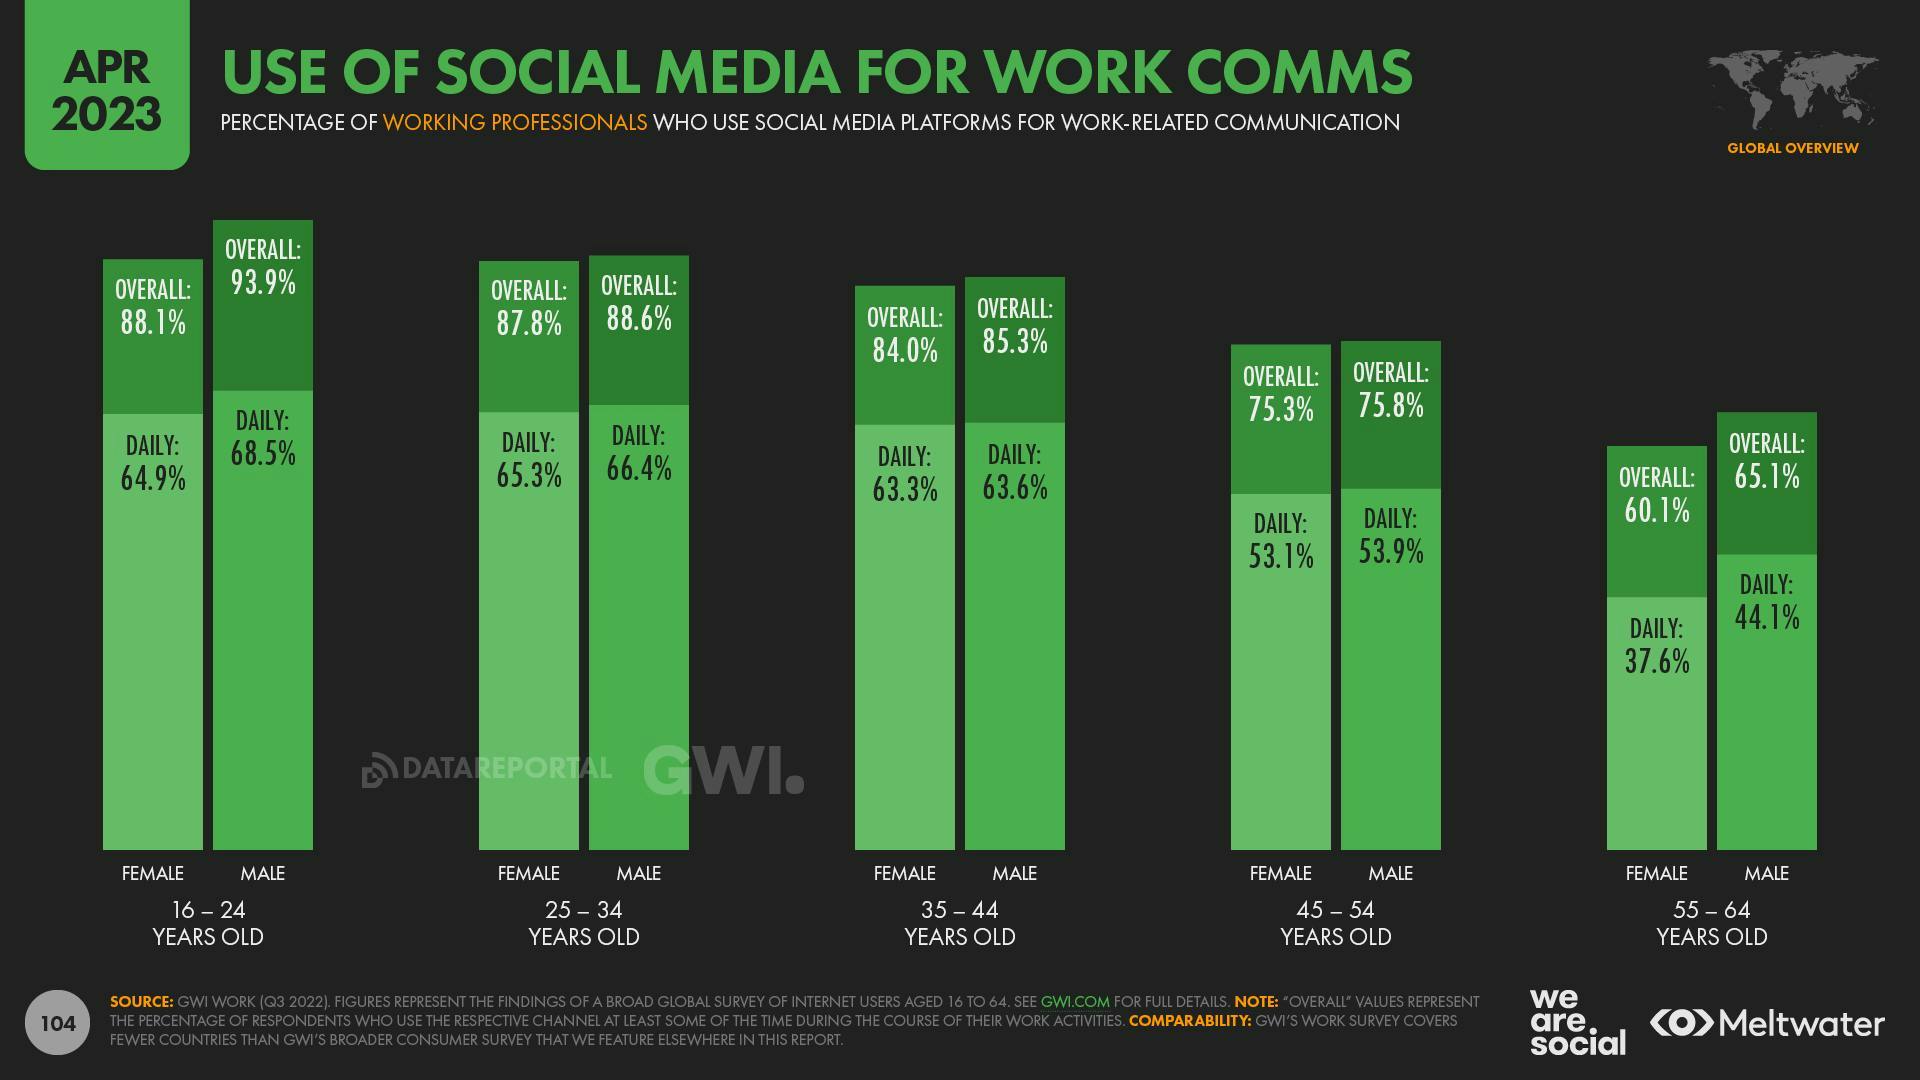 April 2023 Global State of Digital Report: Use of Social Media for Work Comms